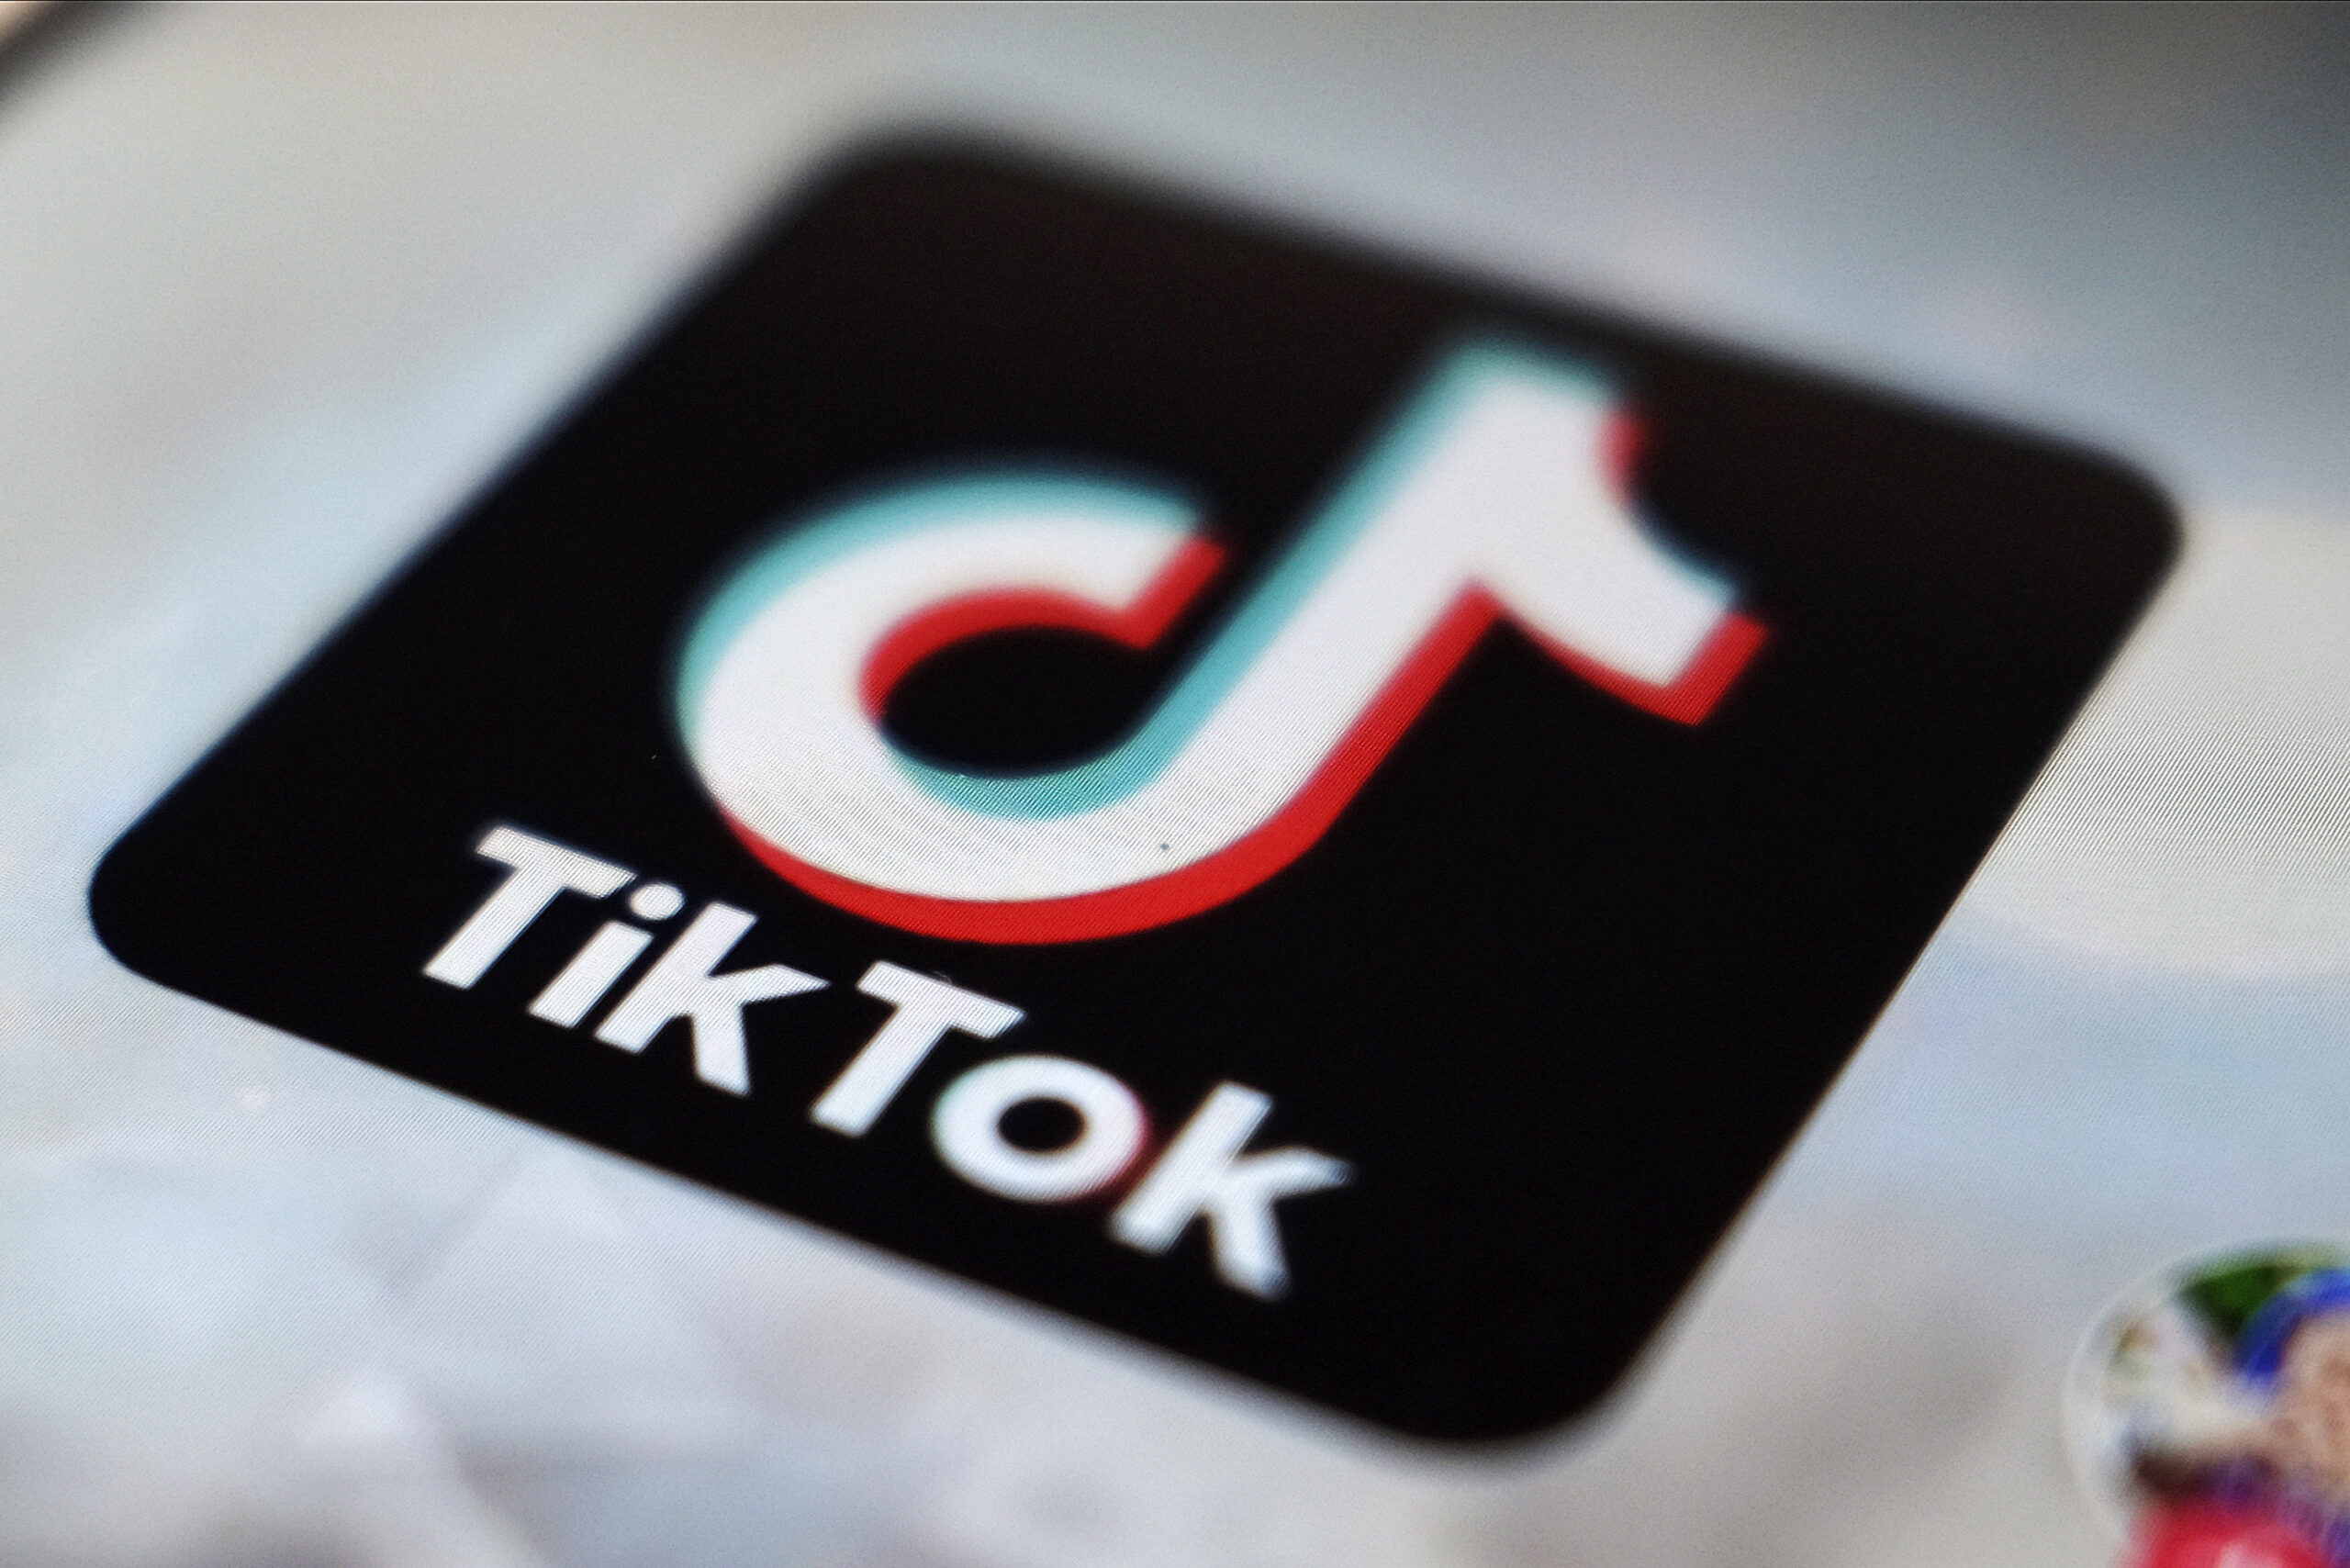 Gov. Evers says he will ban TikTok on state devices next week